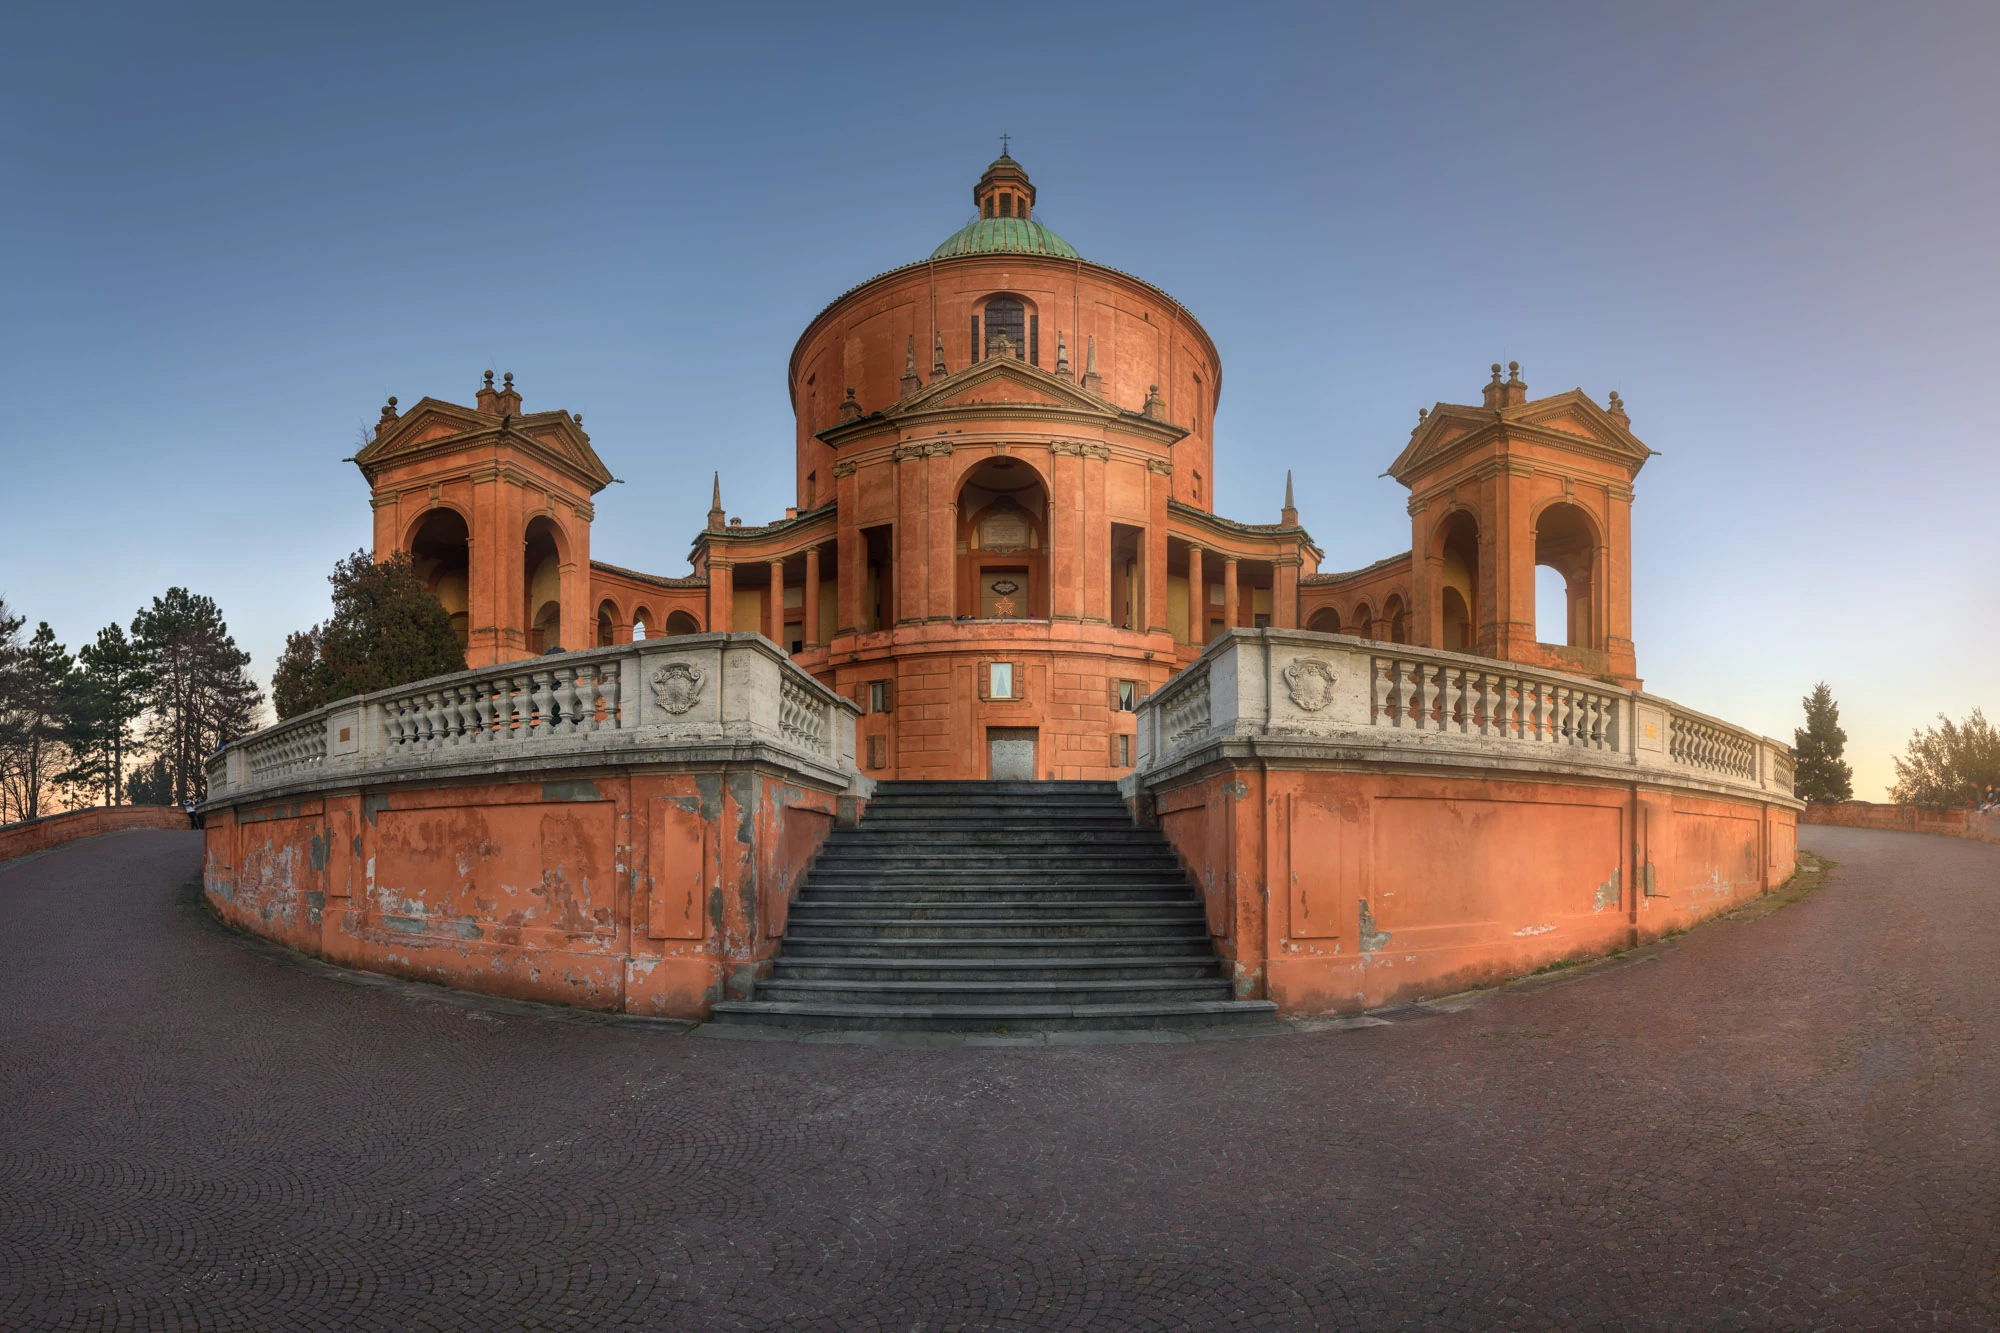 15 Top-Rated Attractions & Things to Do in Bologna